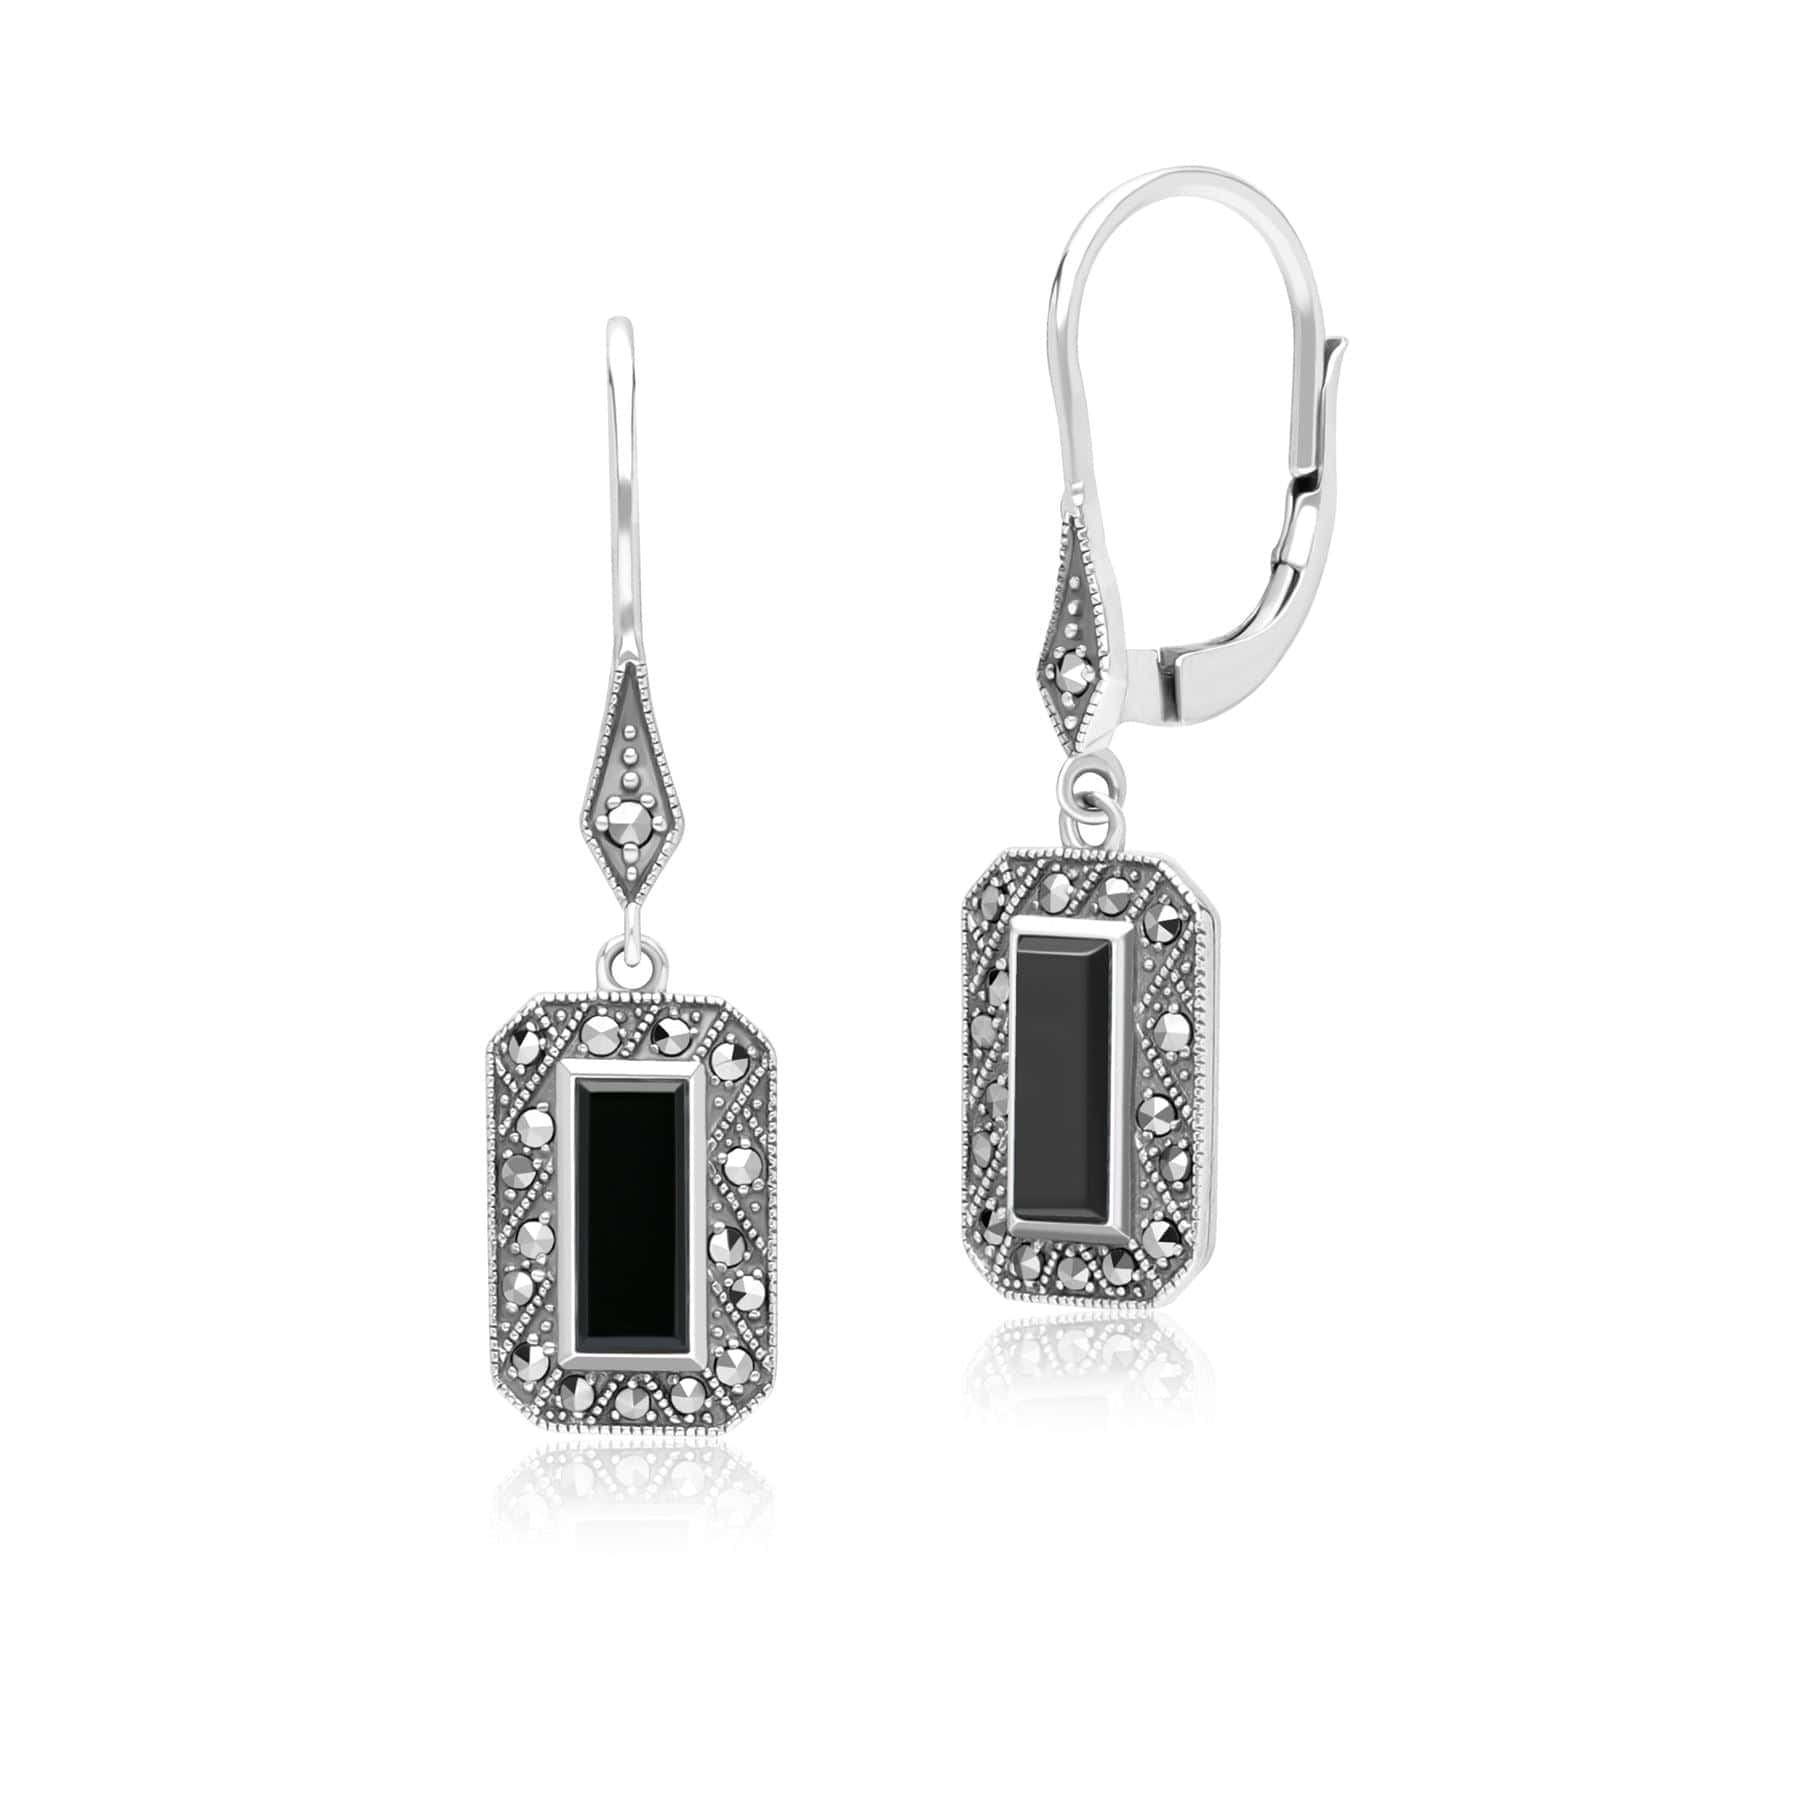 Art Deco Style Rectangle Onyx and Marcasite Drop Earrings in Sterling Silver 214E936102925 